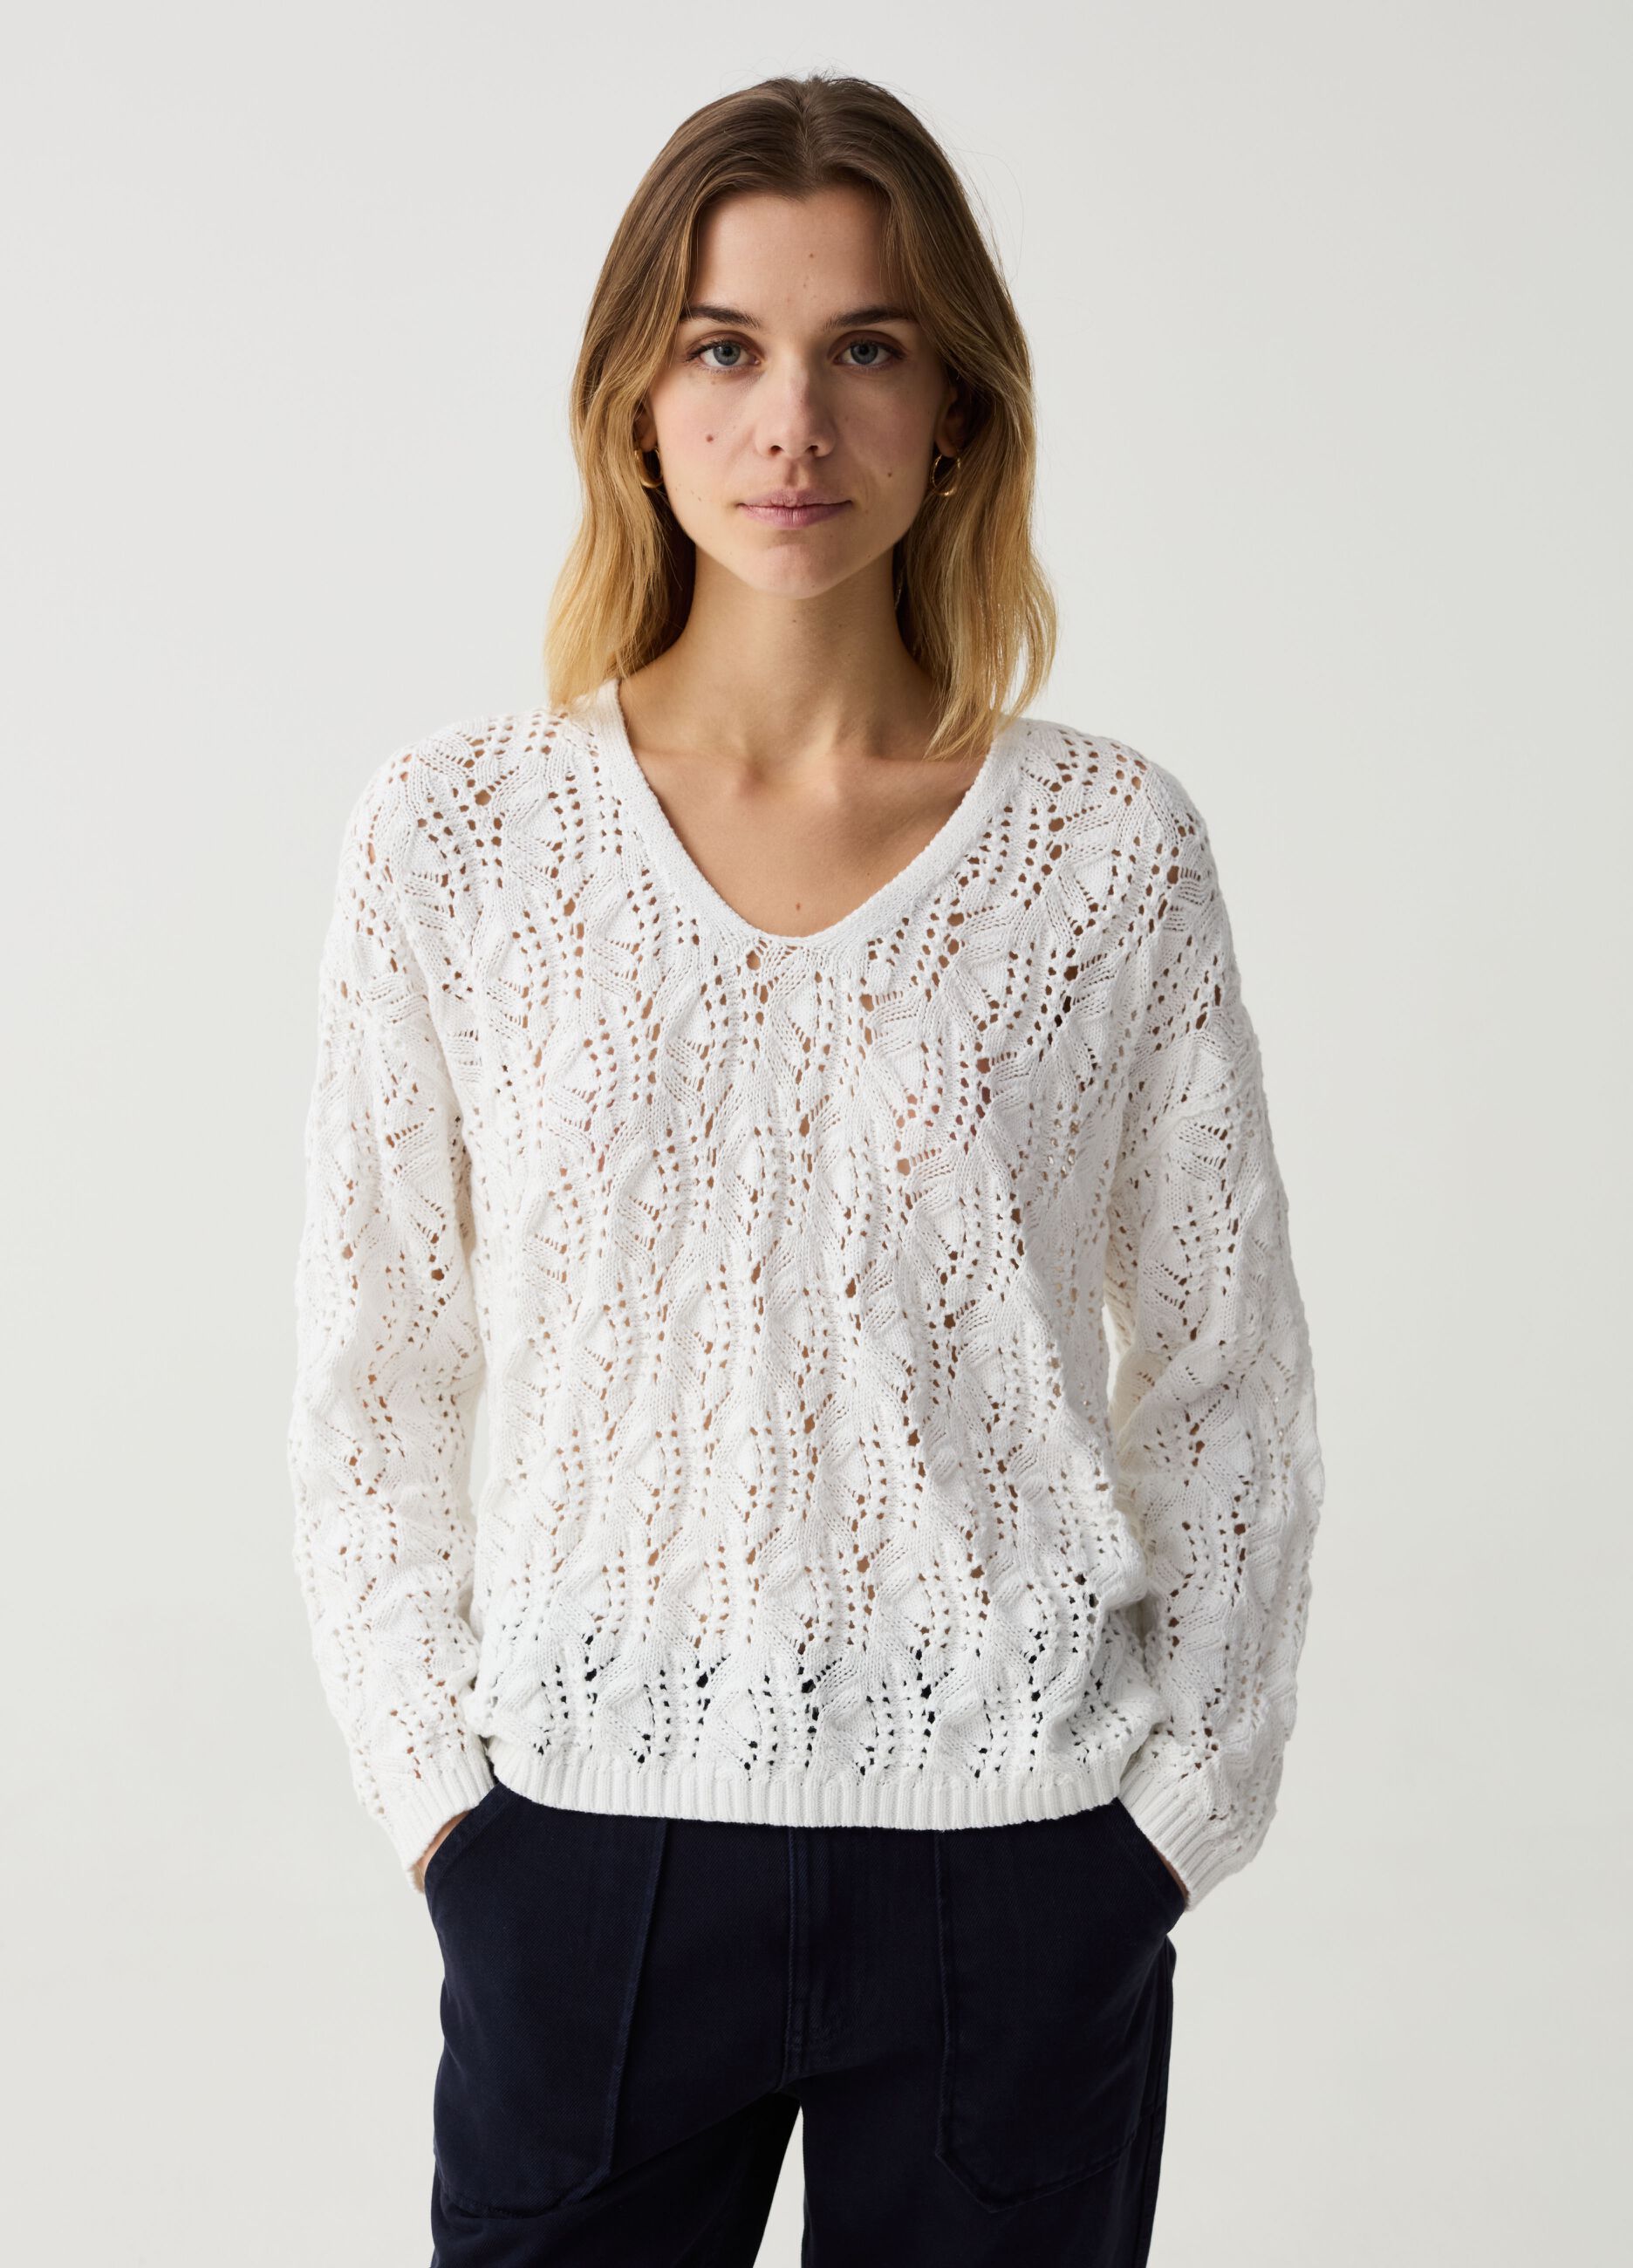 Crochet top with V neck